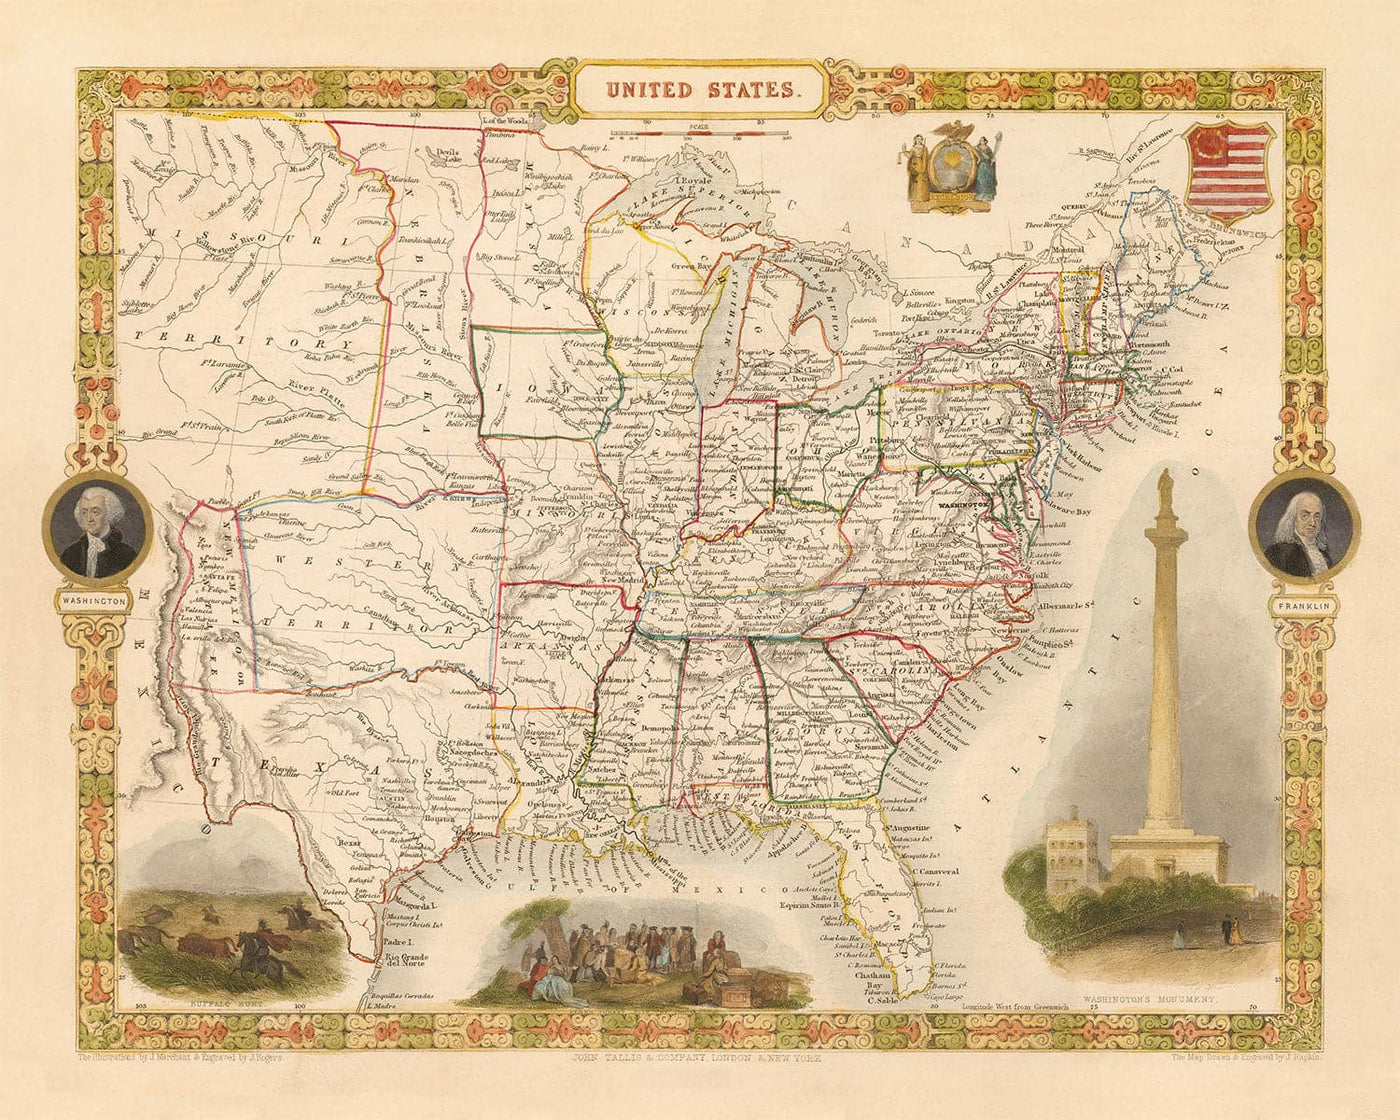 Old Map of the USA, 1851 by Tallis & Rapkin - Large Texas, Western and Missouri Territory, Odd Borders